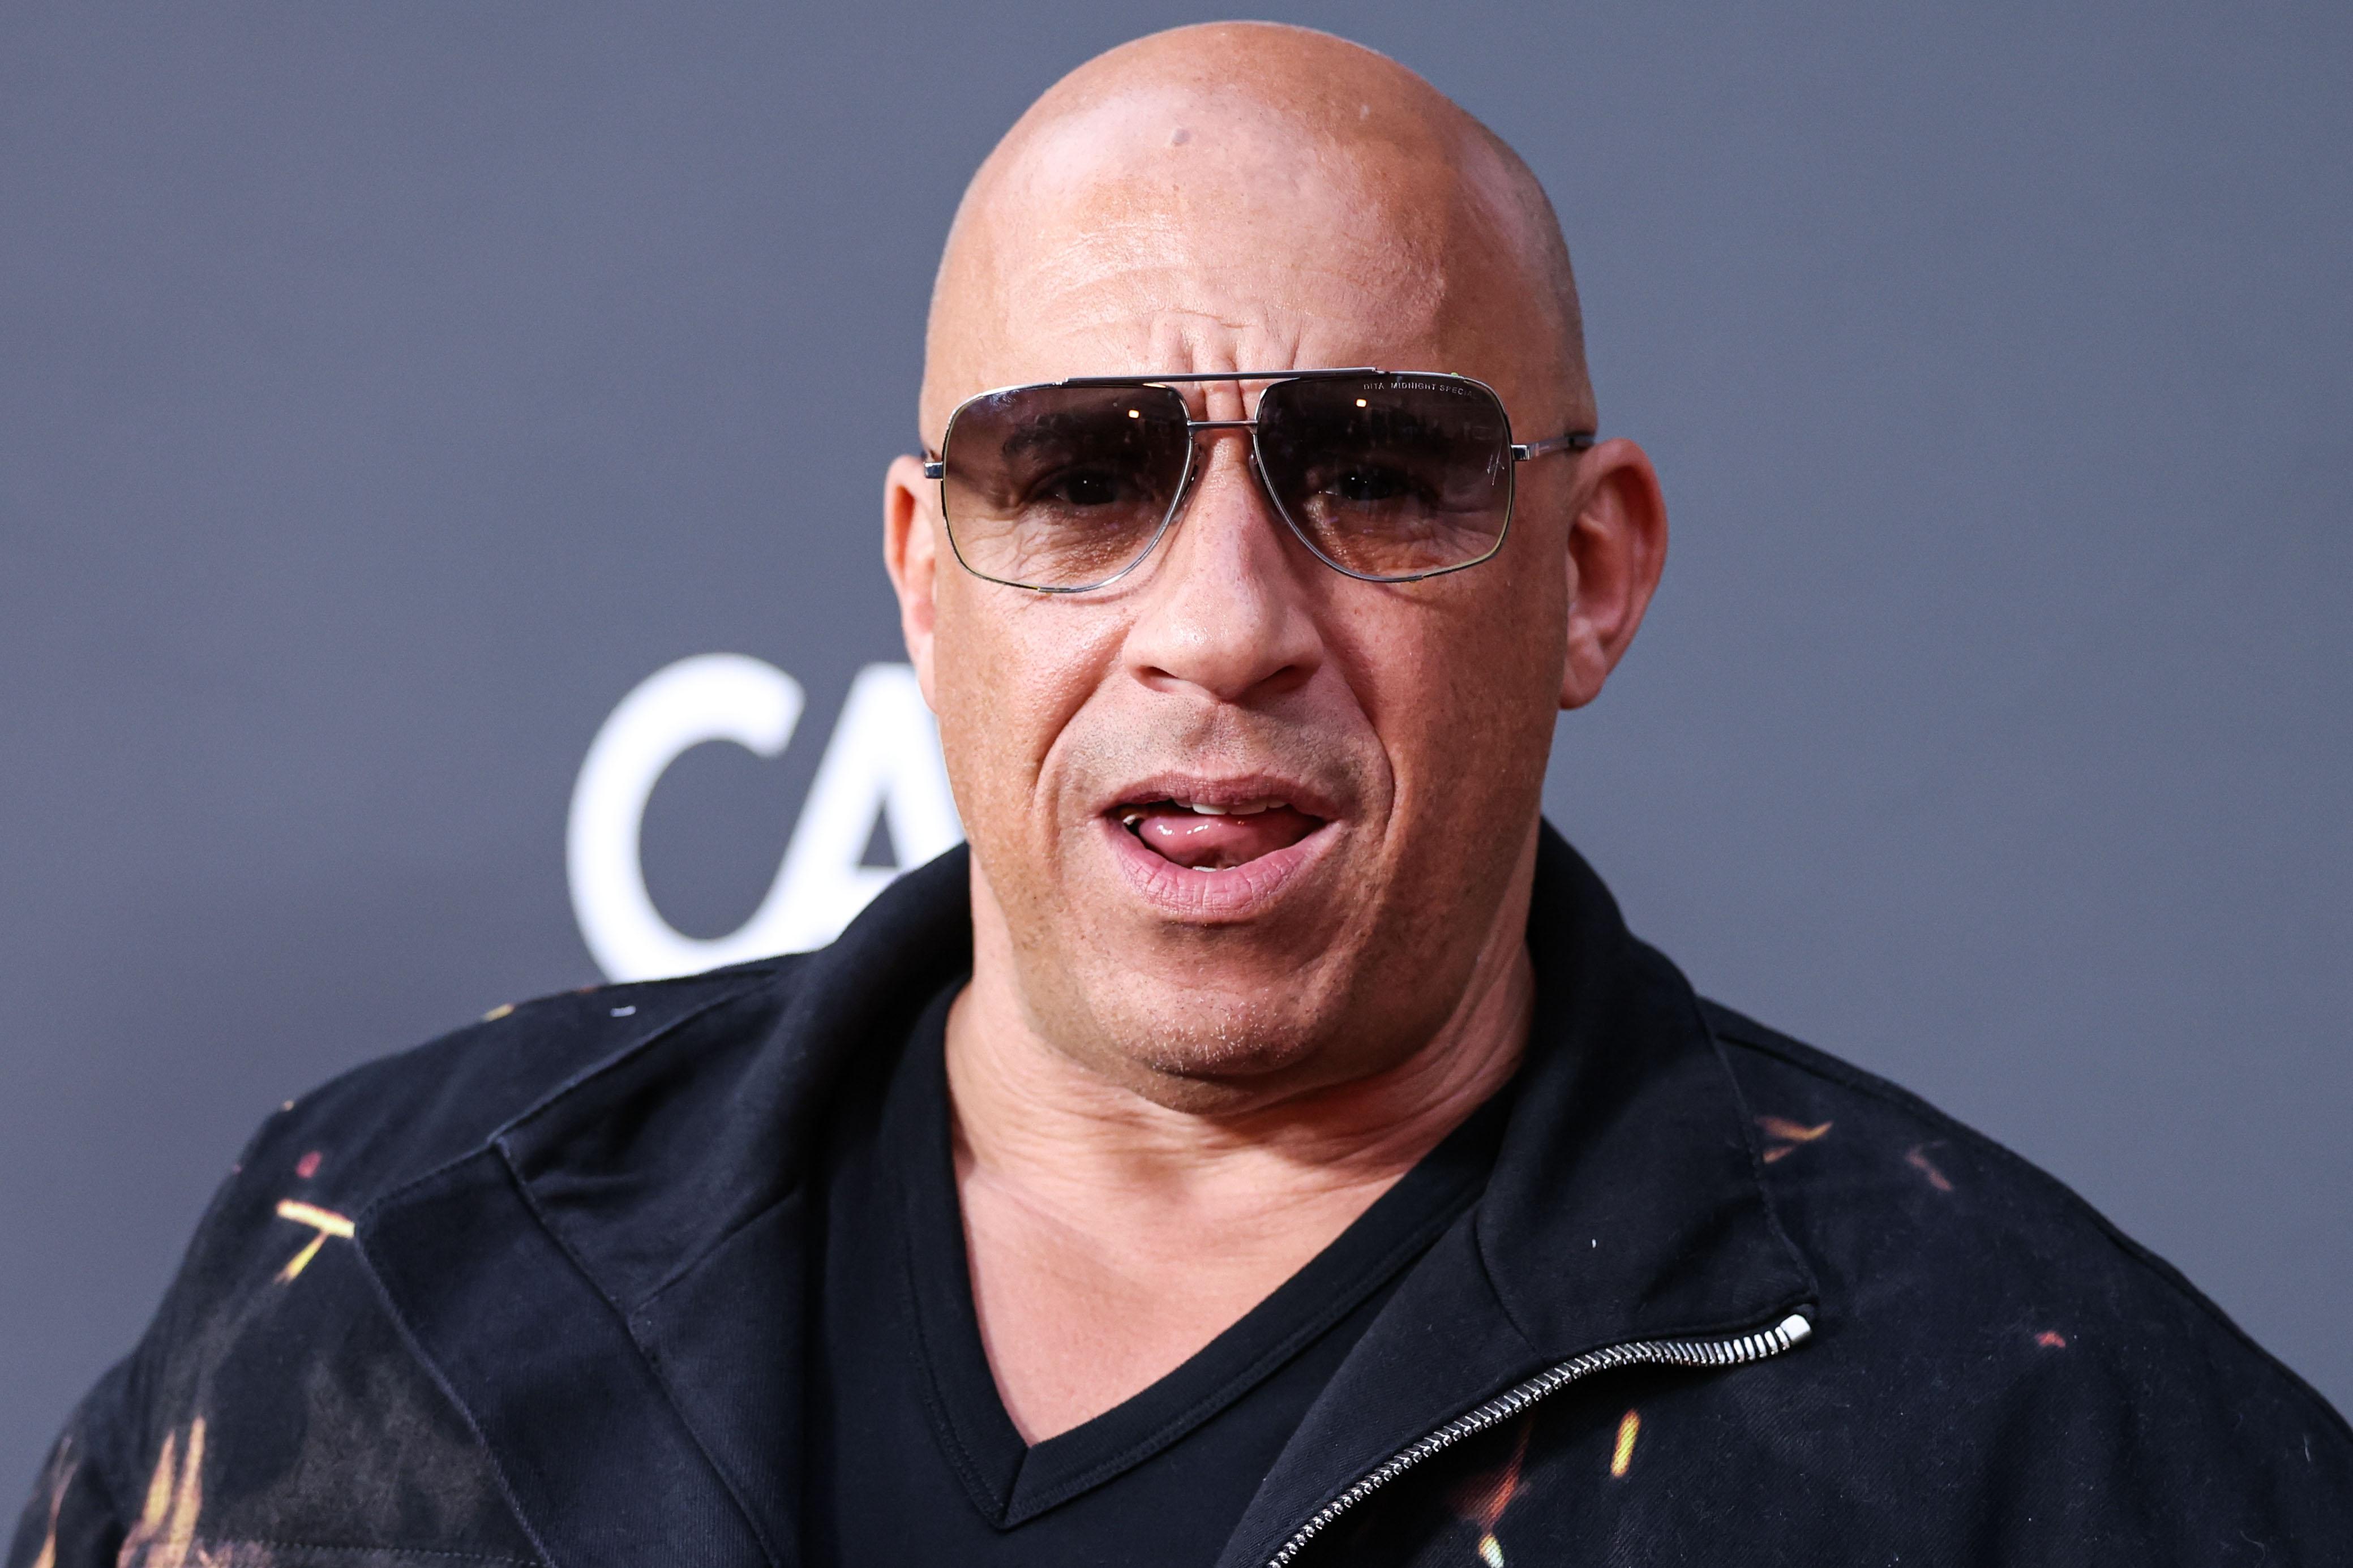 Hollywood, accusations of sexual harassment for Vin Diesel - Pledge Times